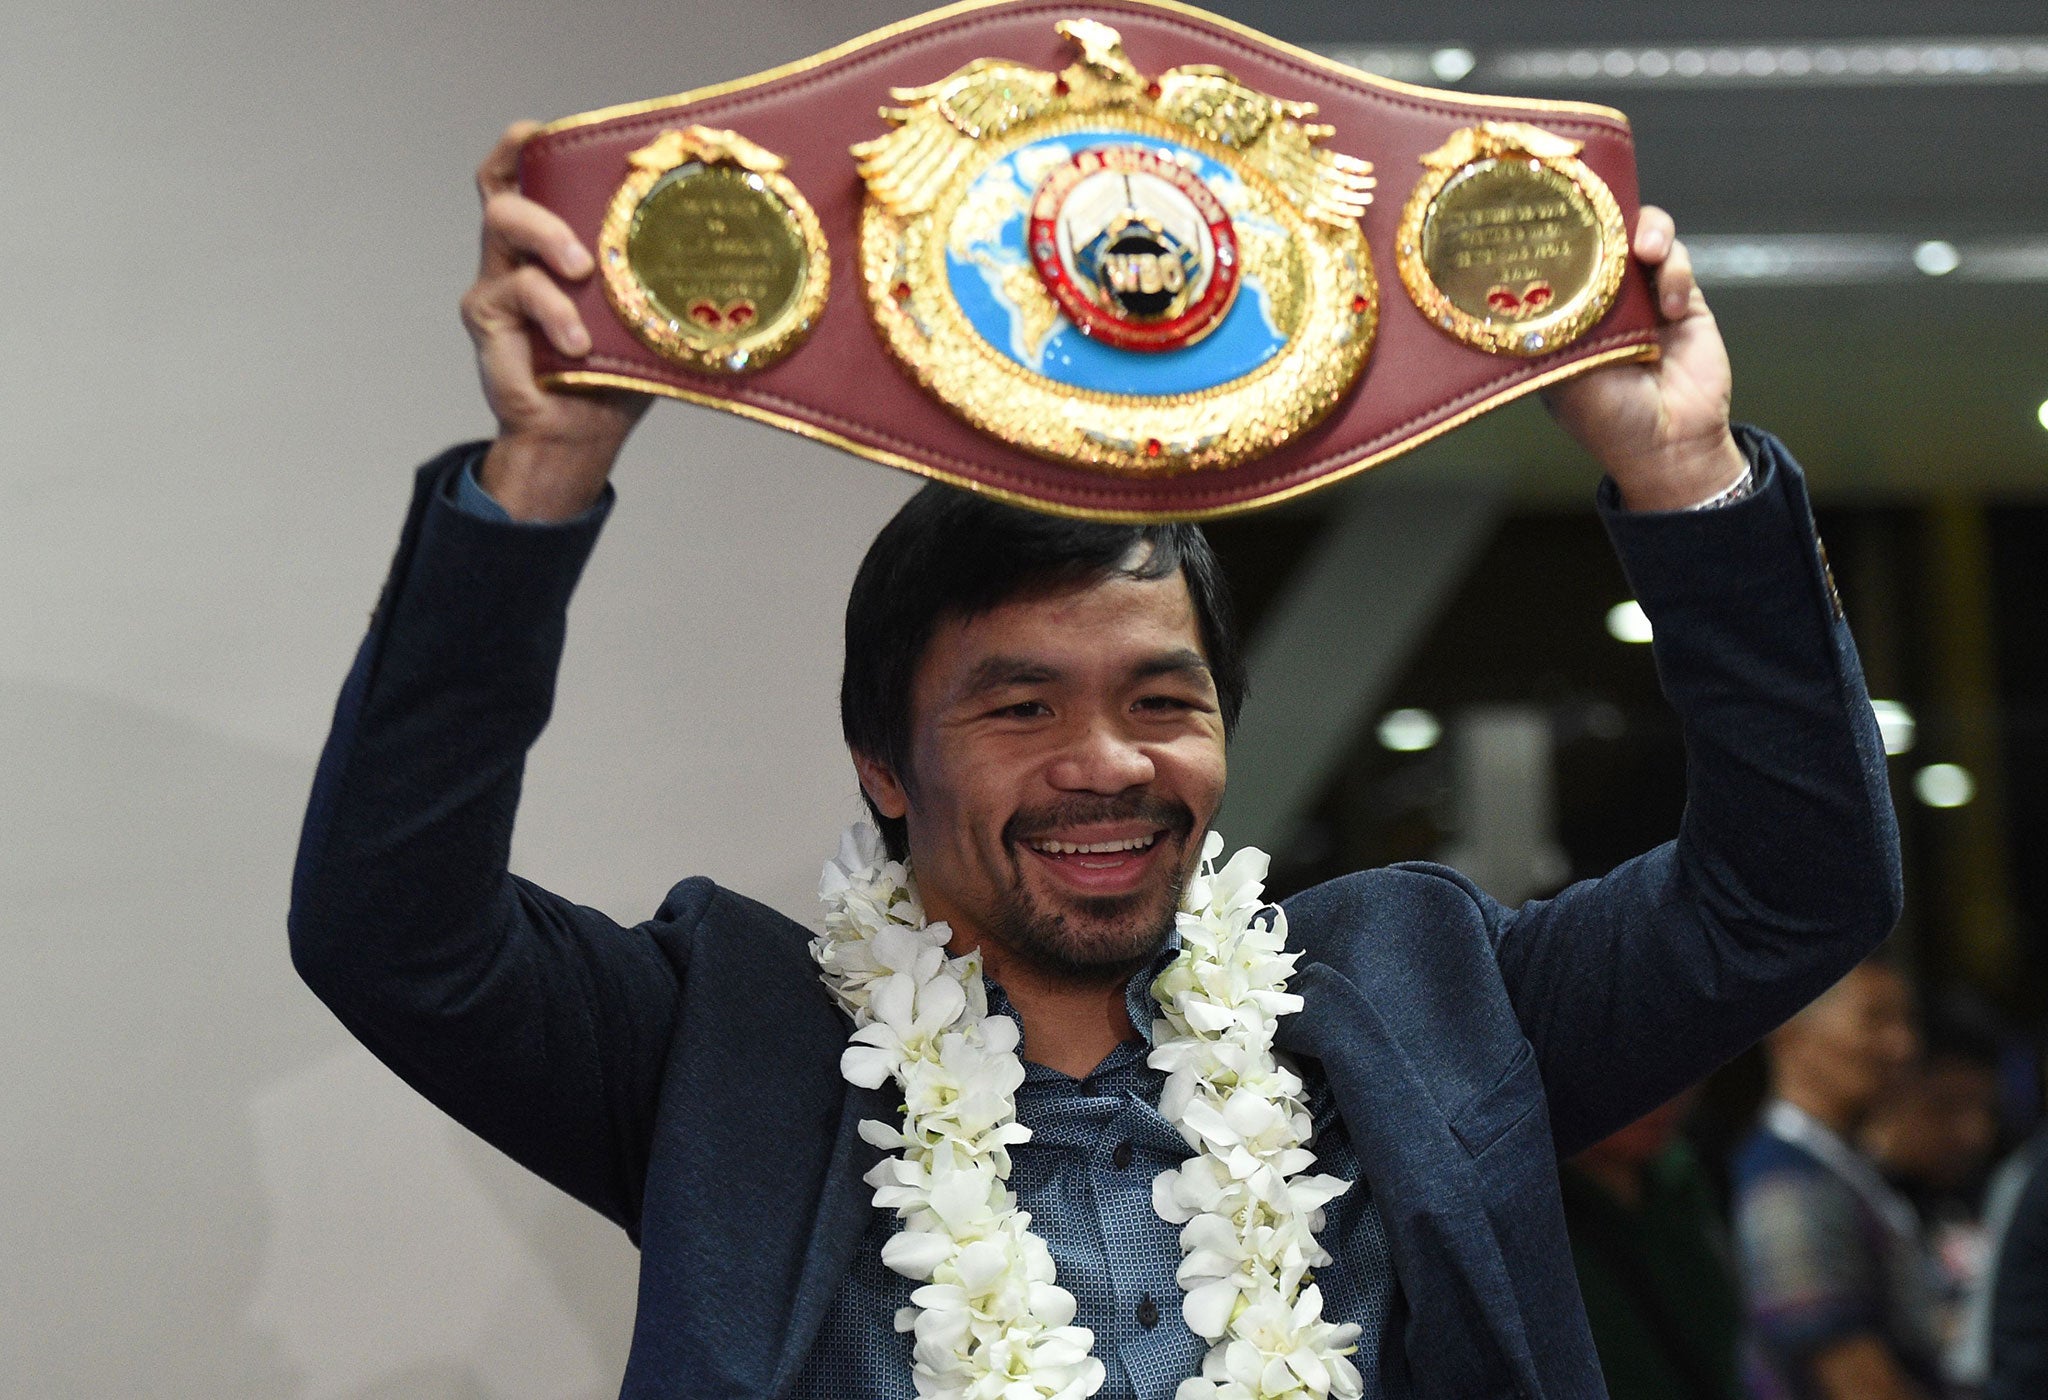 Manny Pacquiao has not agreed a deal to fight Amir Khan, says his promoter Bob Arum